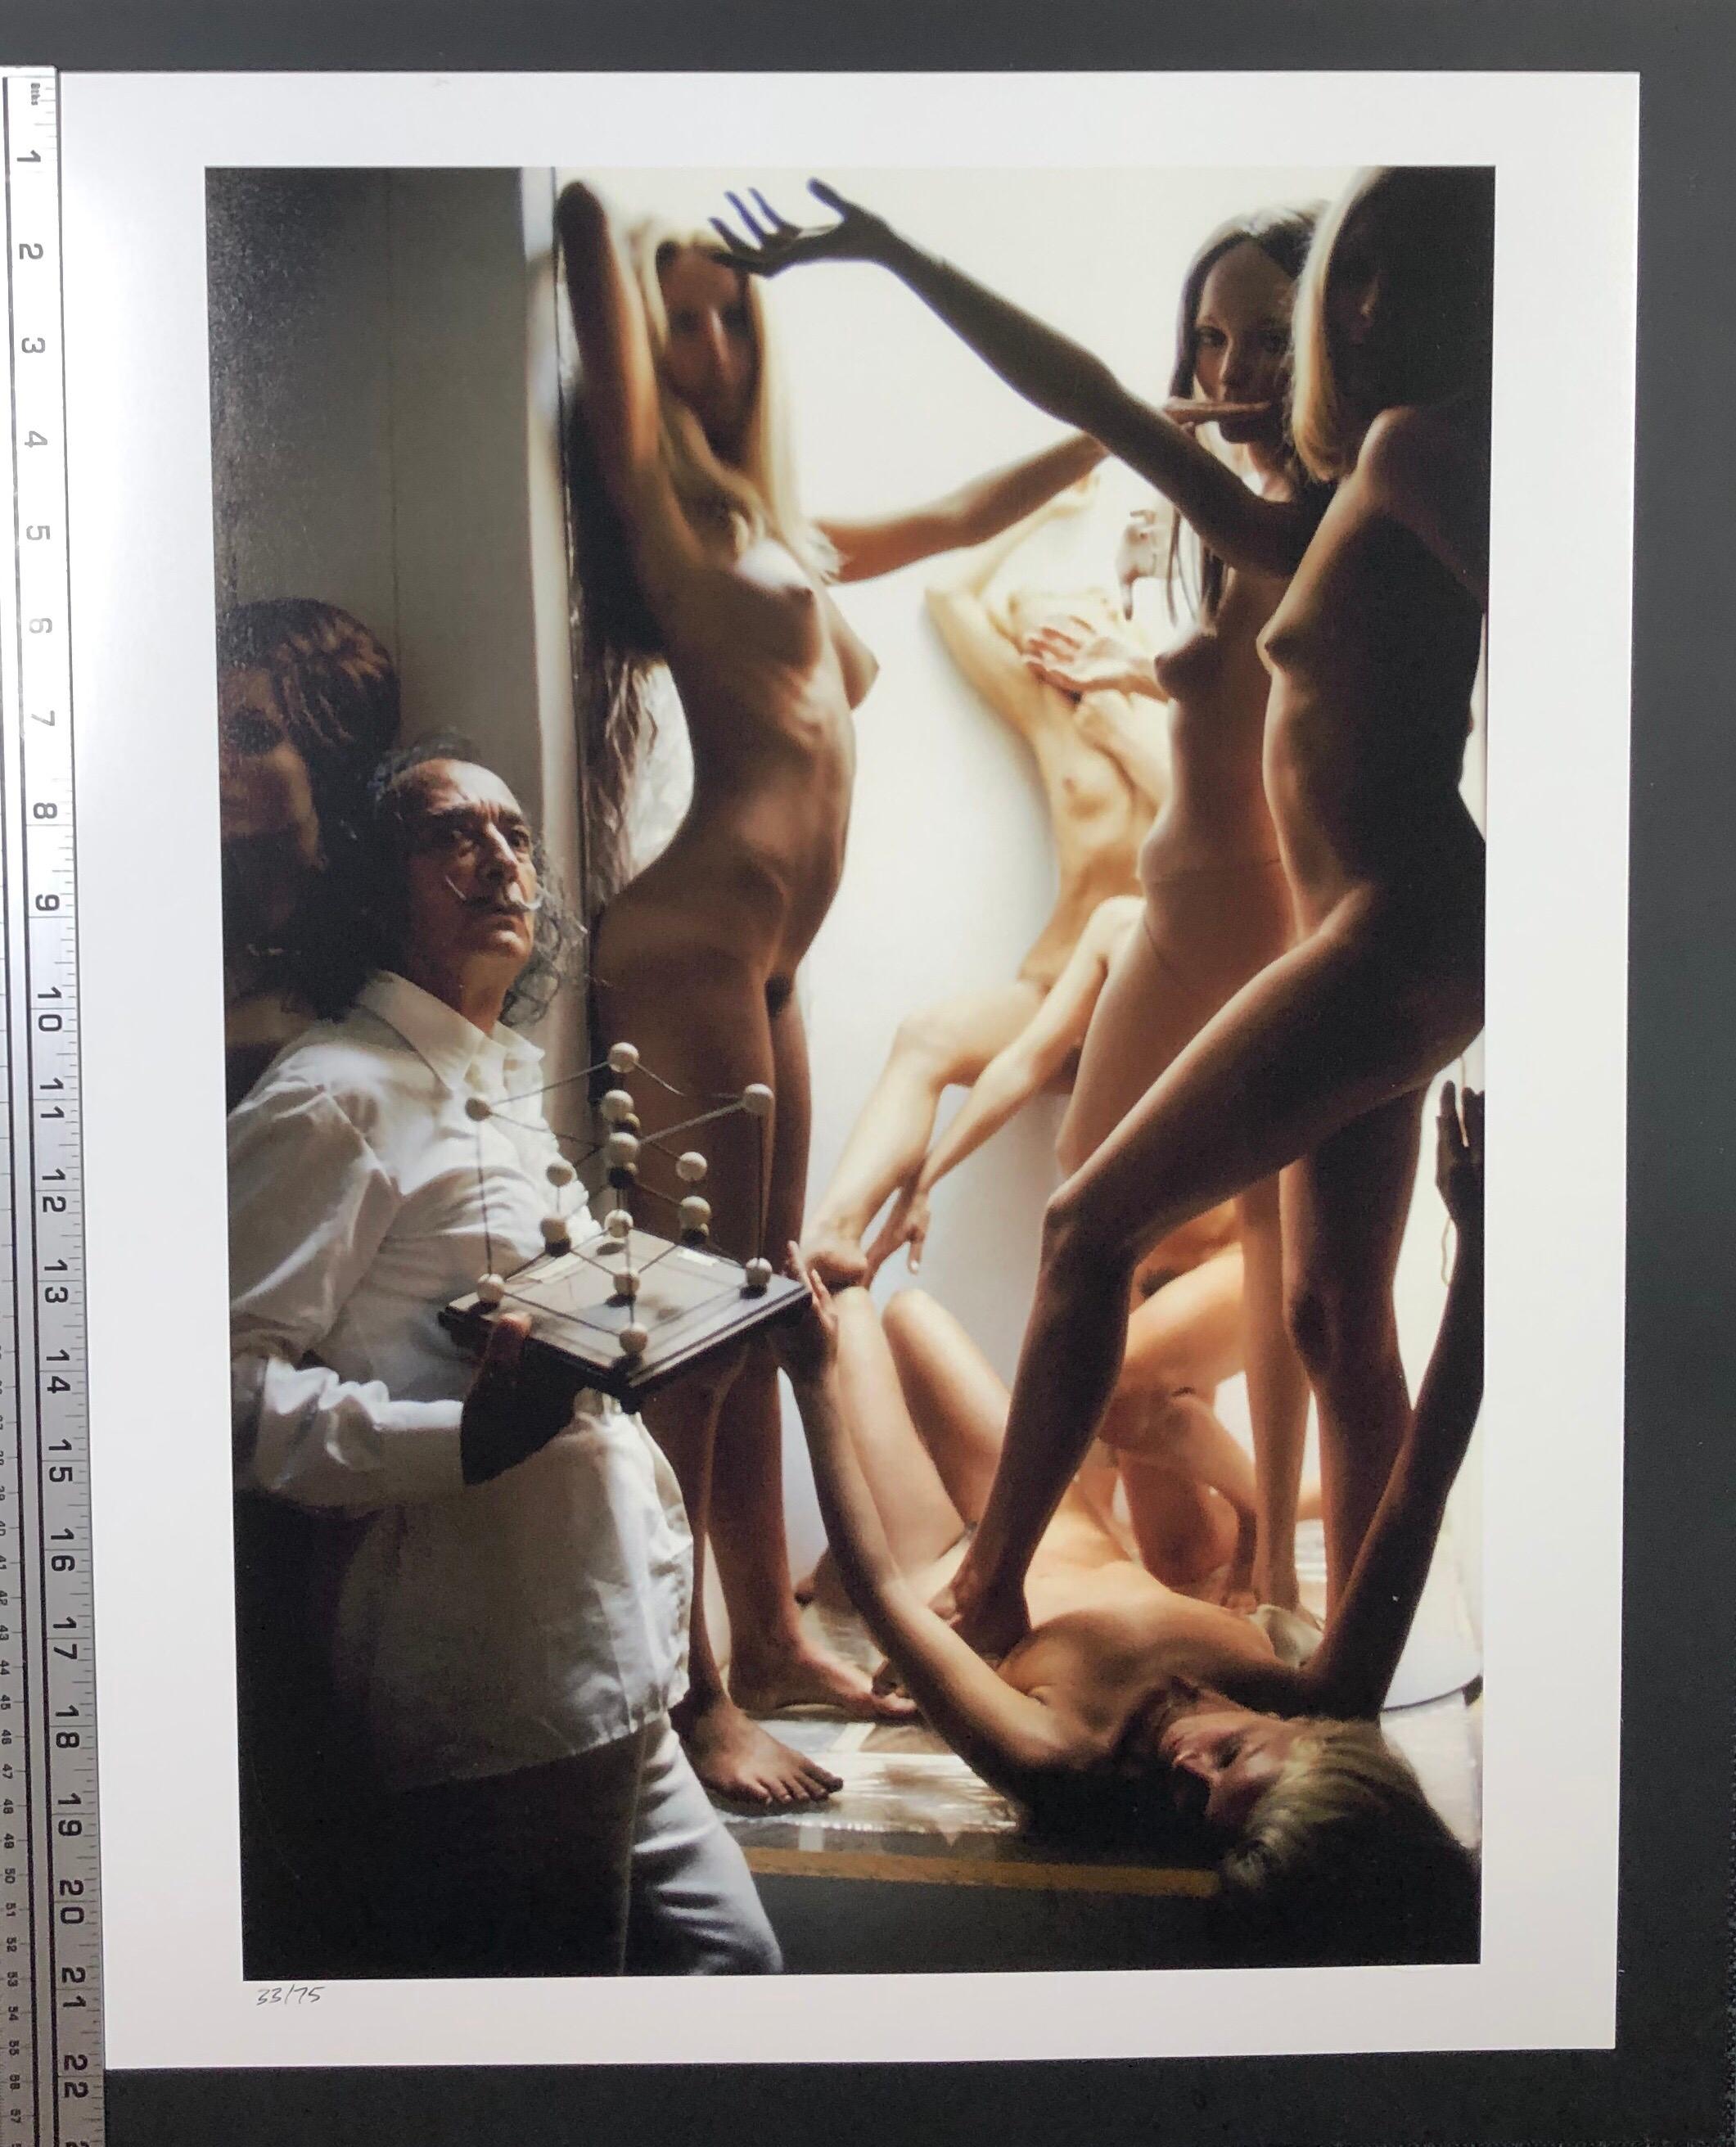 Salvador Dali II for Playboy Legacy Collection 1973 Edition 33 of 75 - Black Nude Photograph by Salvador Dalí